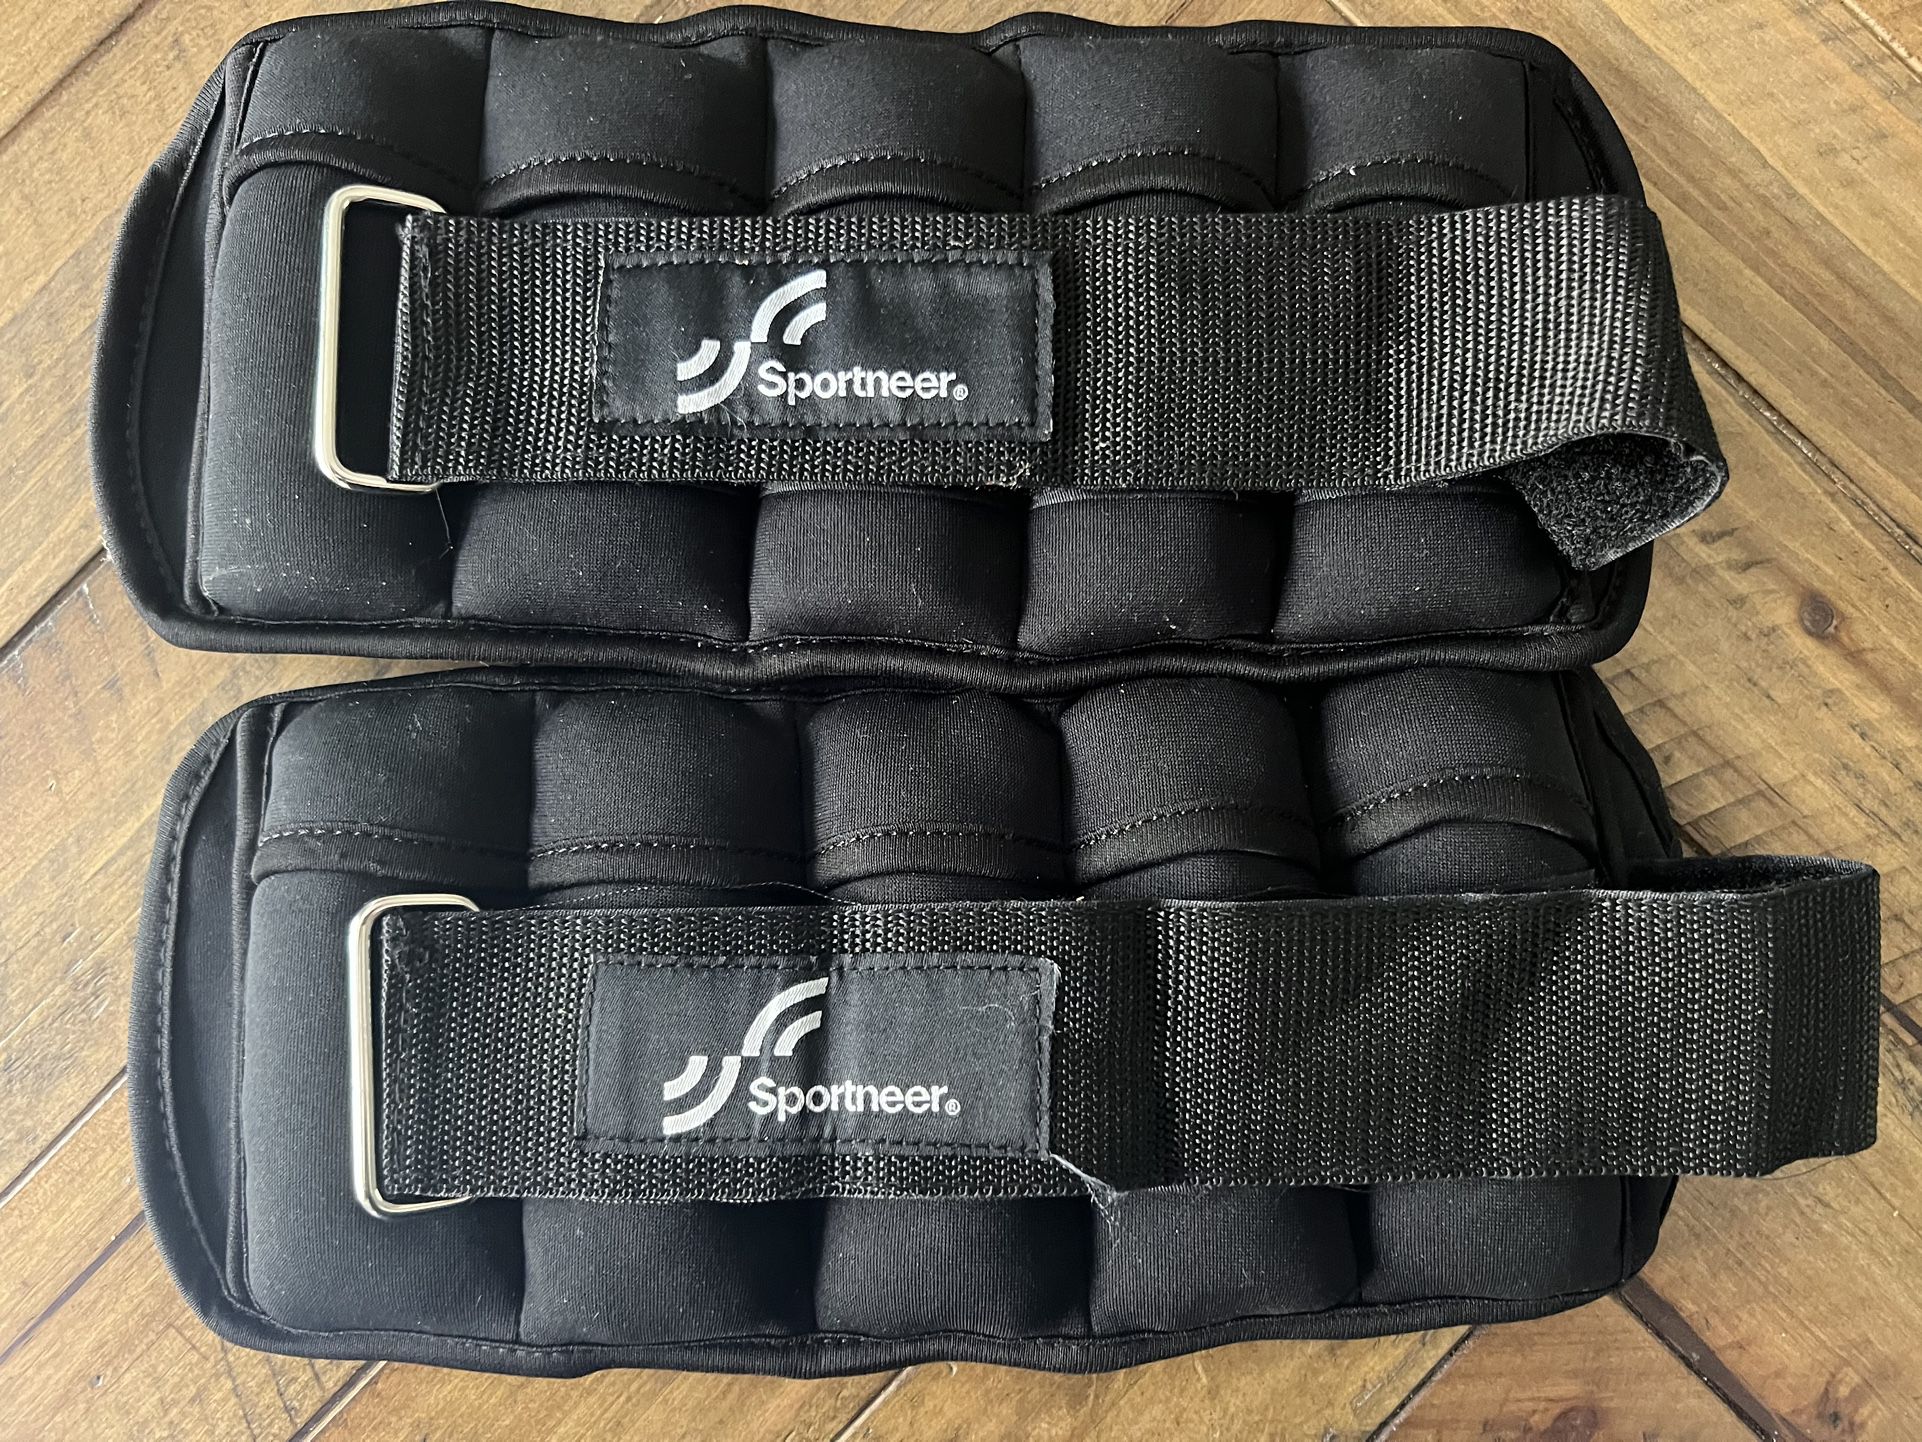 Set of Ankle Weights (5lbs Each)